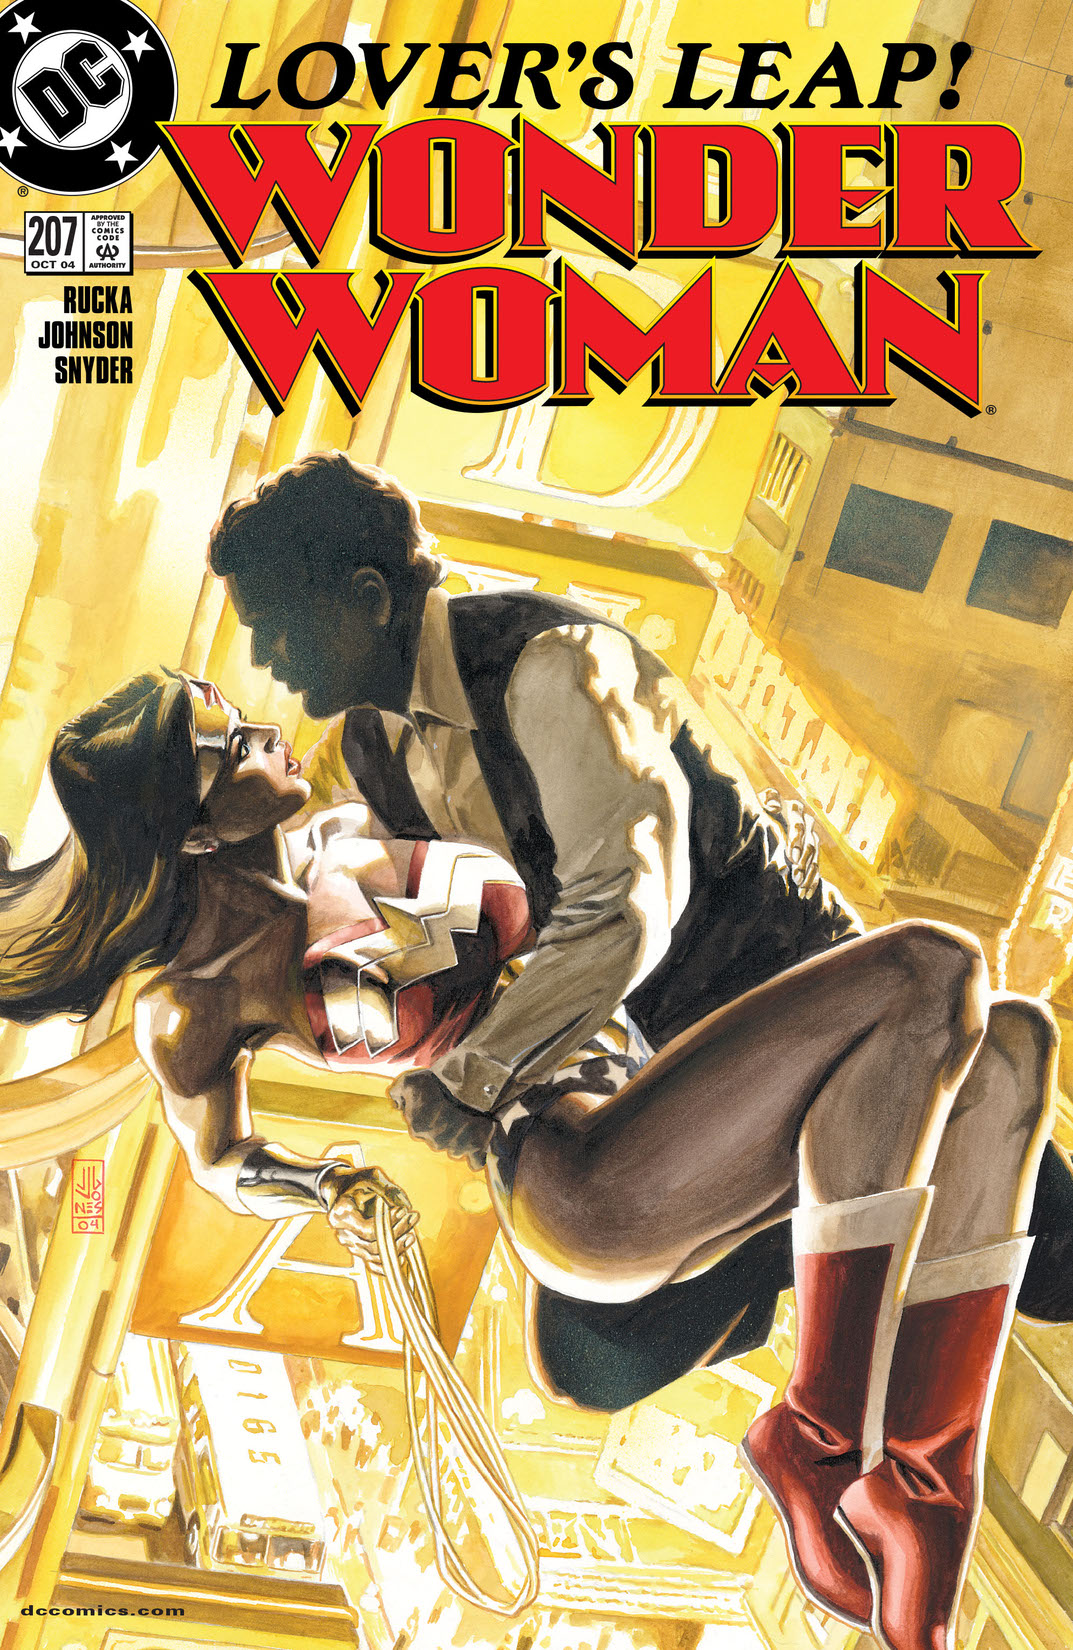 Wonder Woman (1986-) #207 preview images